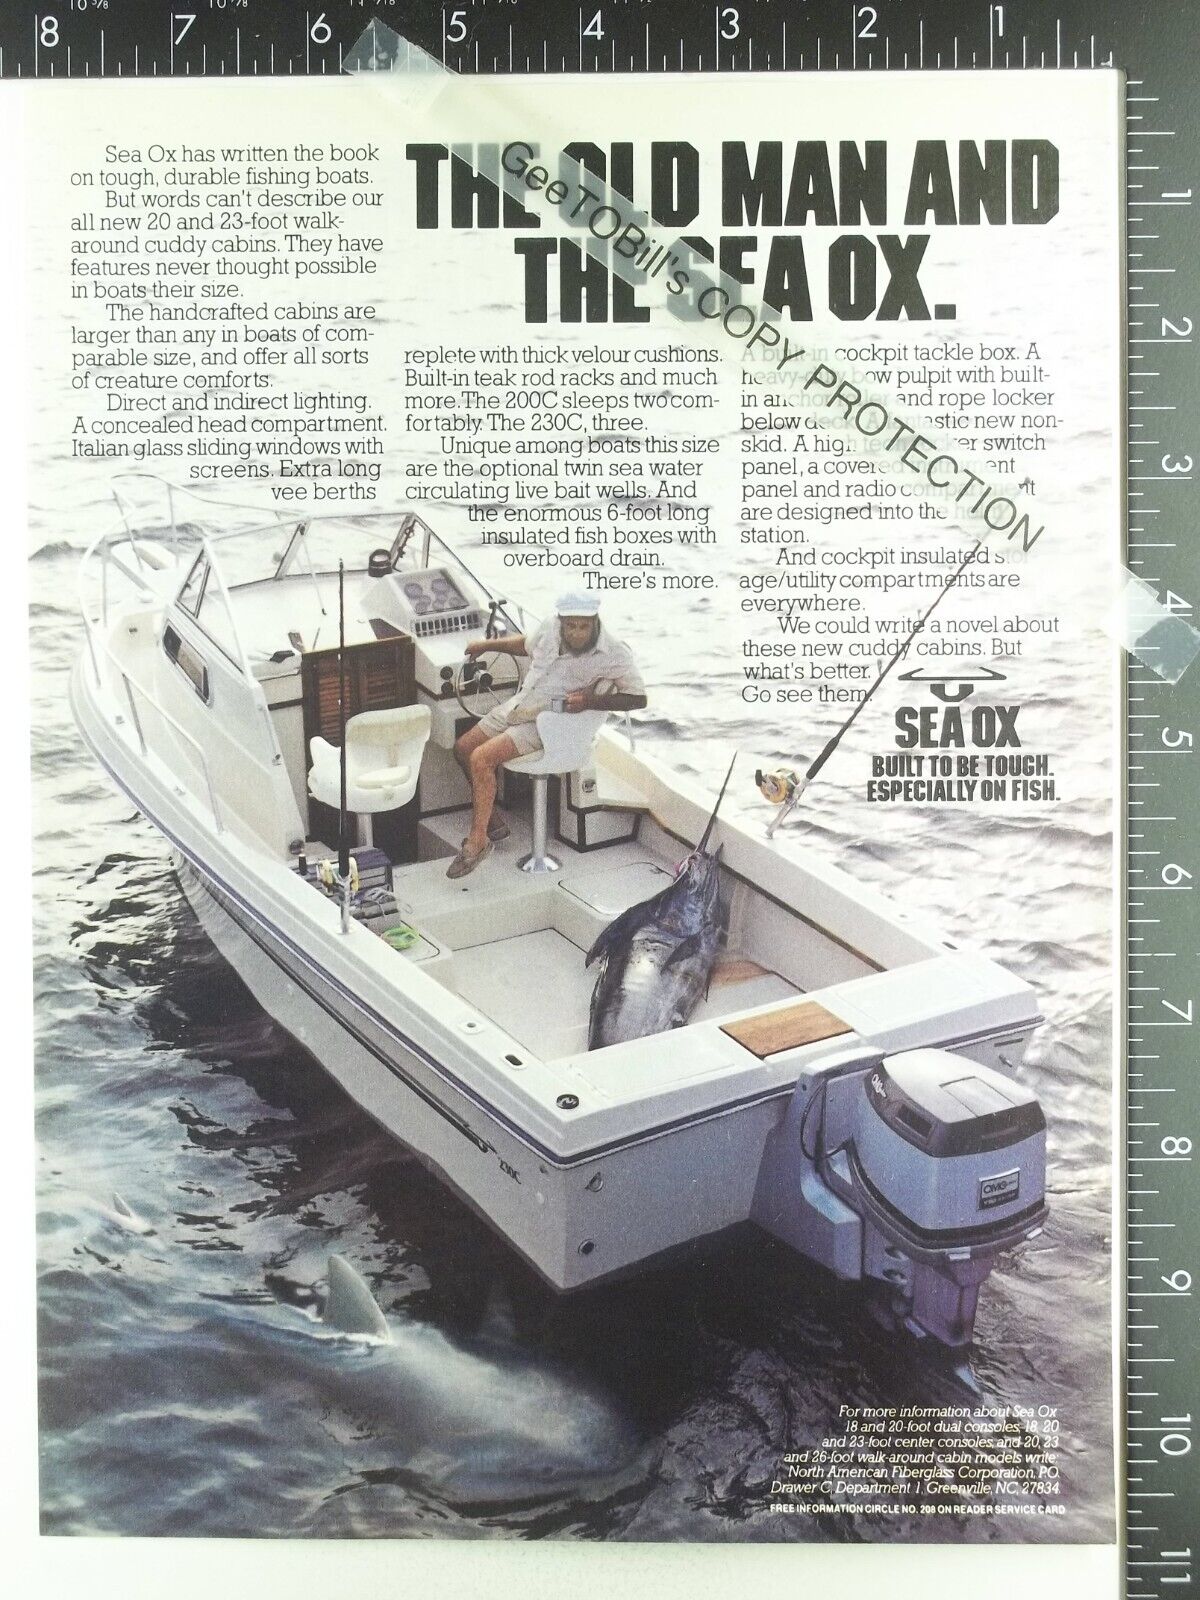 1987 ADVERTISING ADVERTISEMENT AD for Sea Ox 230C boat 1986 1988